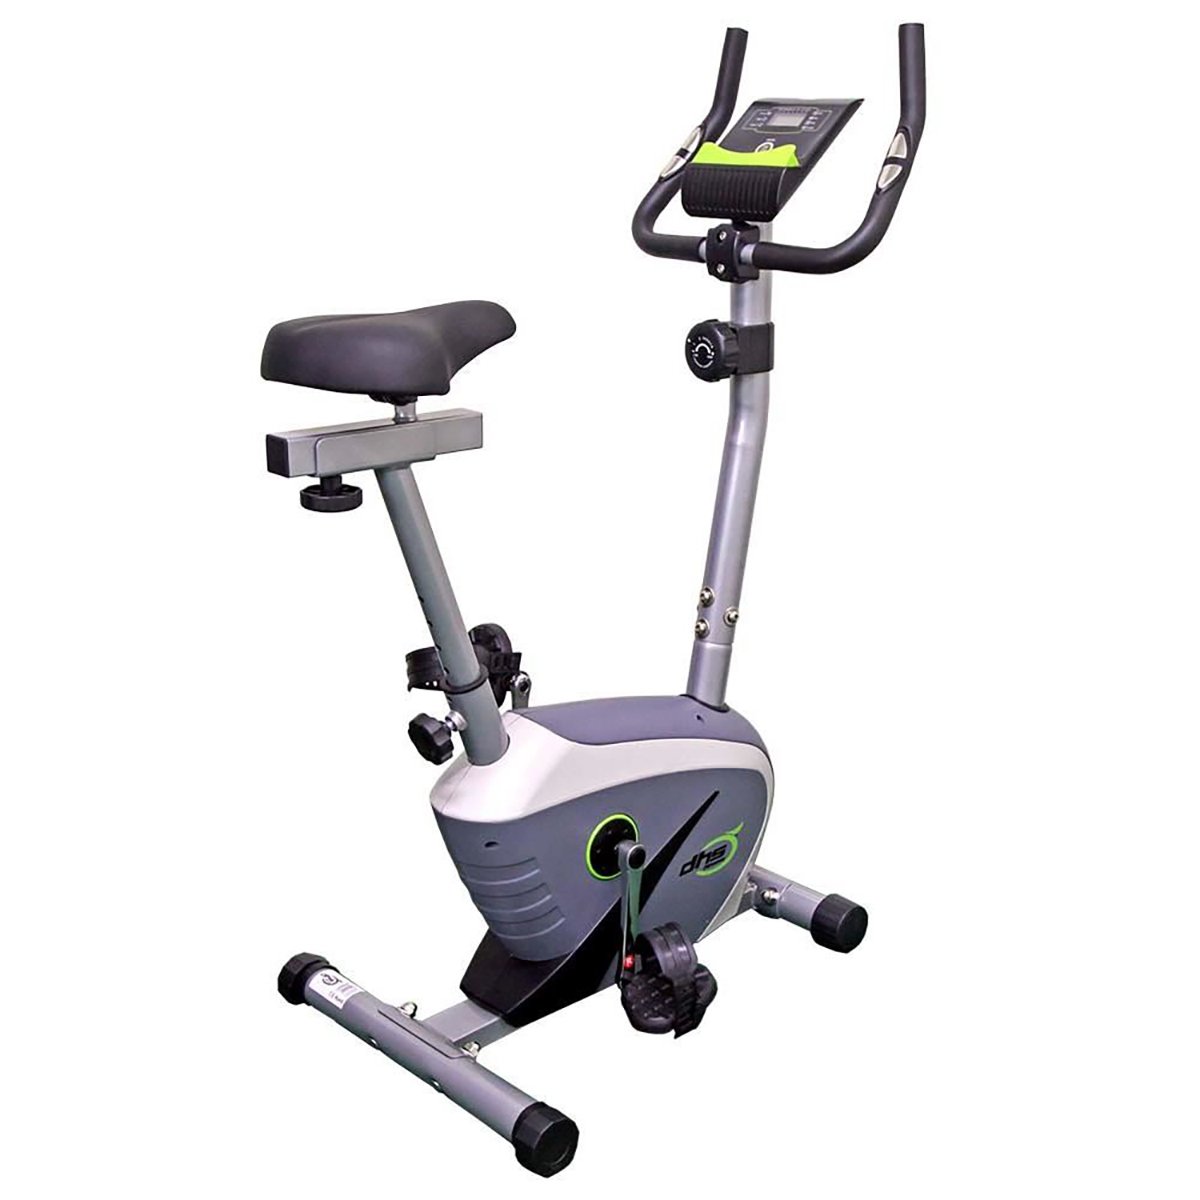 Bicicleta fitness magnetica DHS 2309 DHS